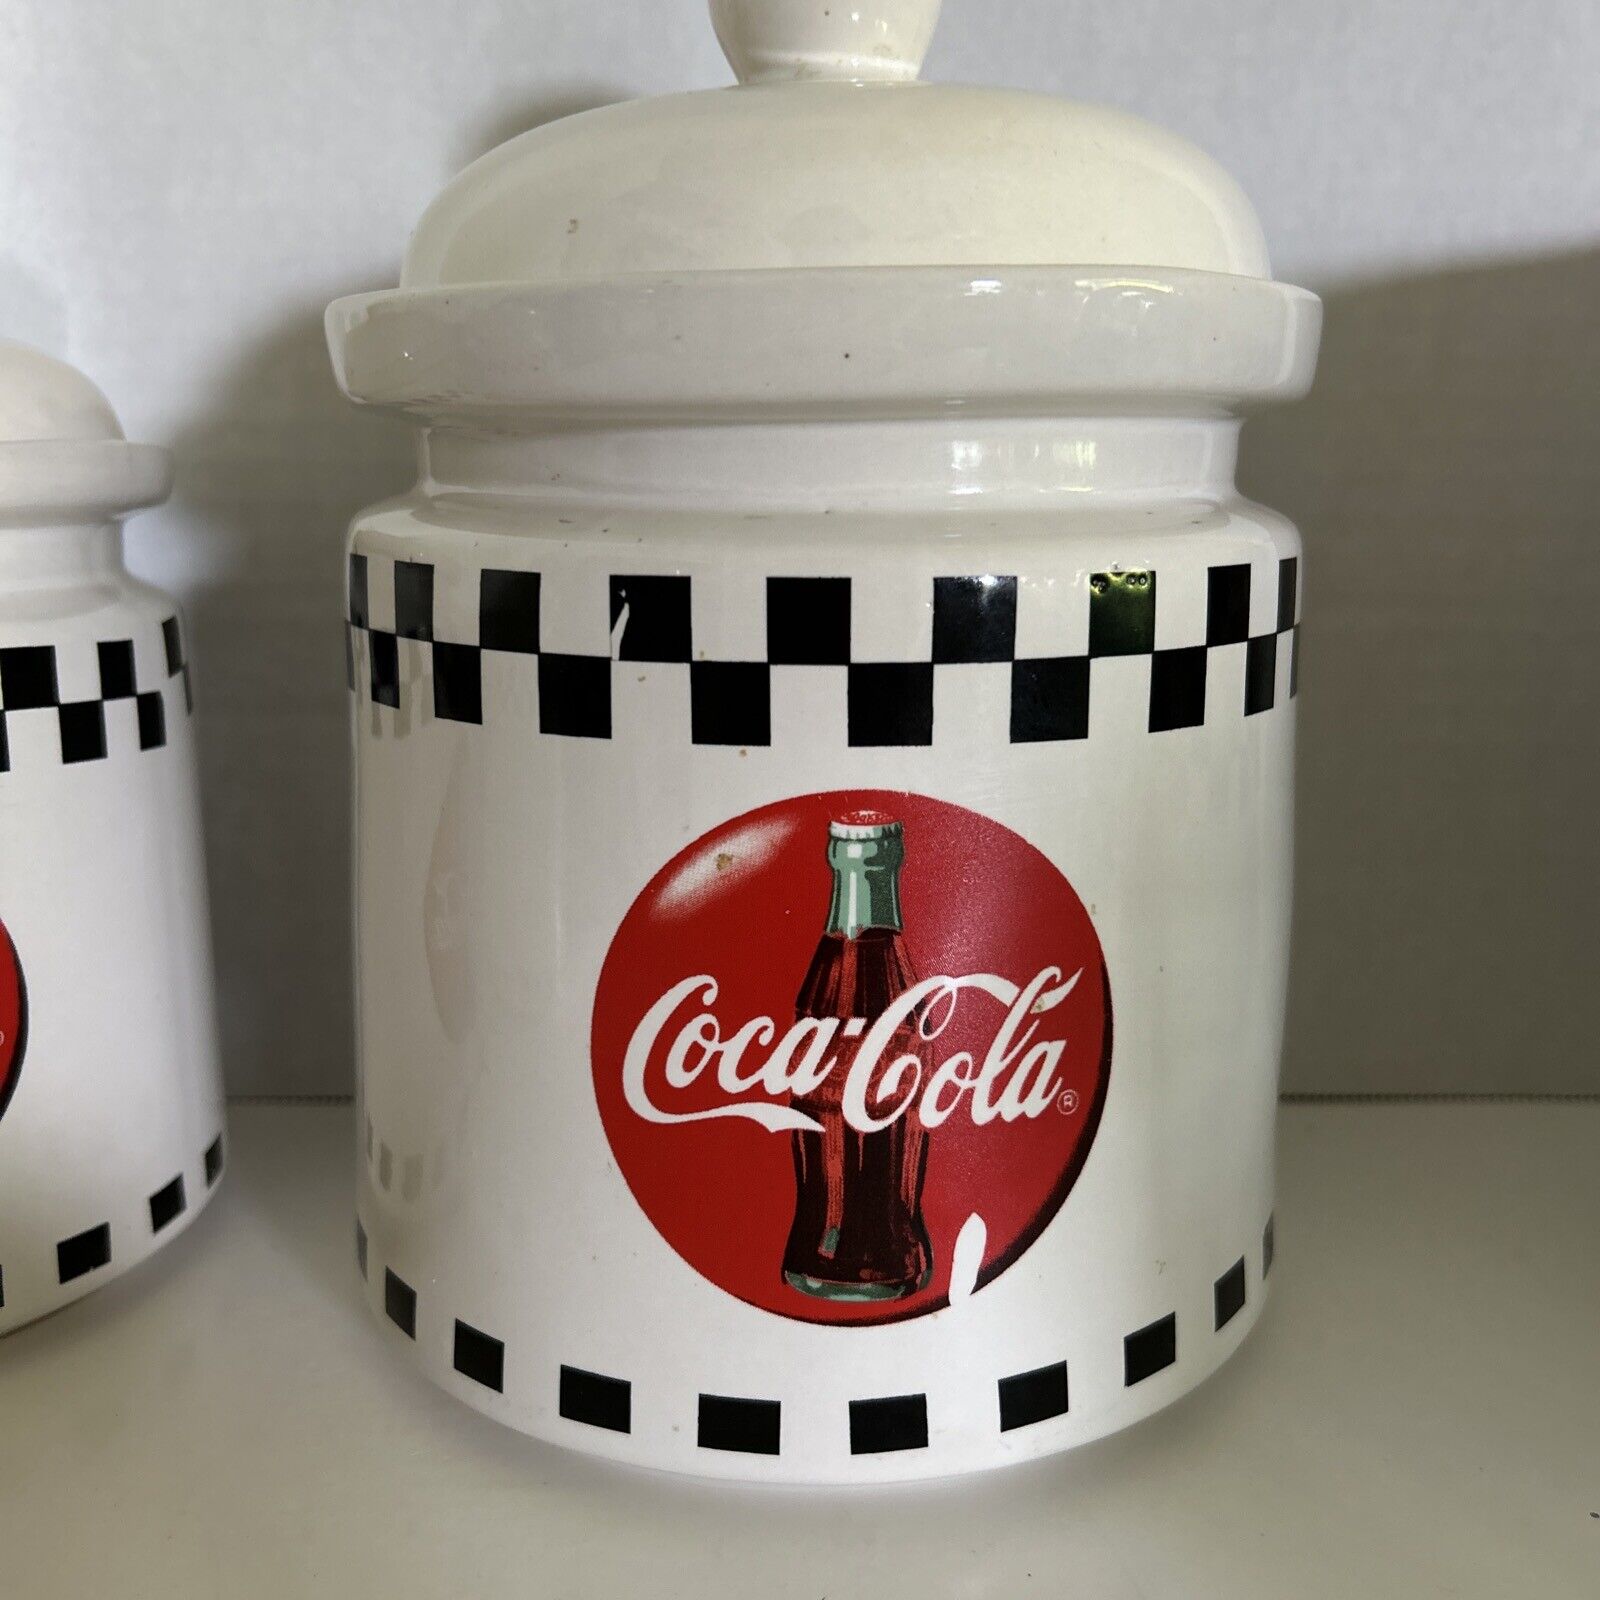 Coca-cola Vintage 1996 Gibson Checkered Canisters, Dinnerware, Flatware, Glasses